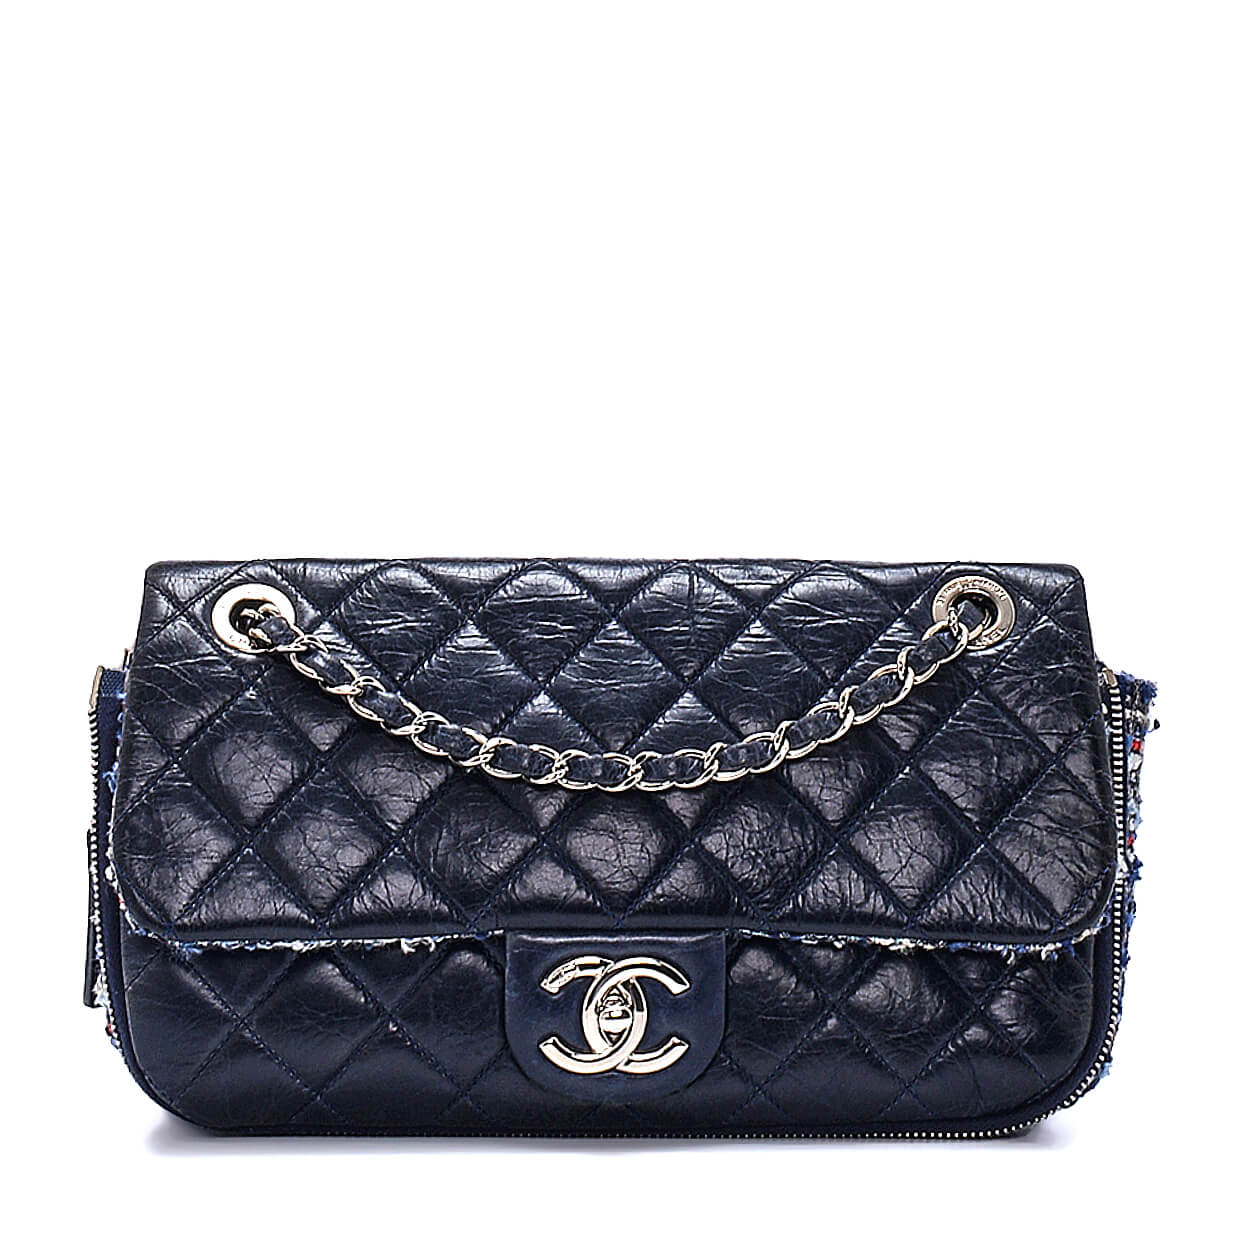 Chanel - Navy Blue Quilted Leather & Tweed Classic Single Flap Bag